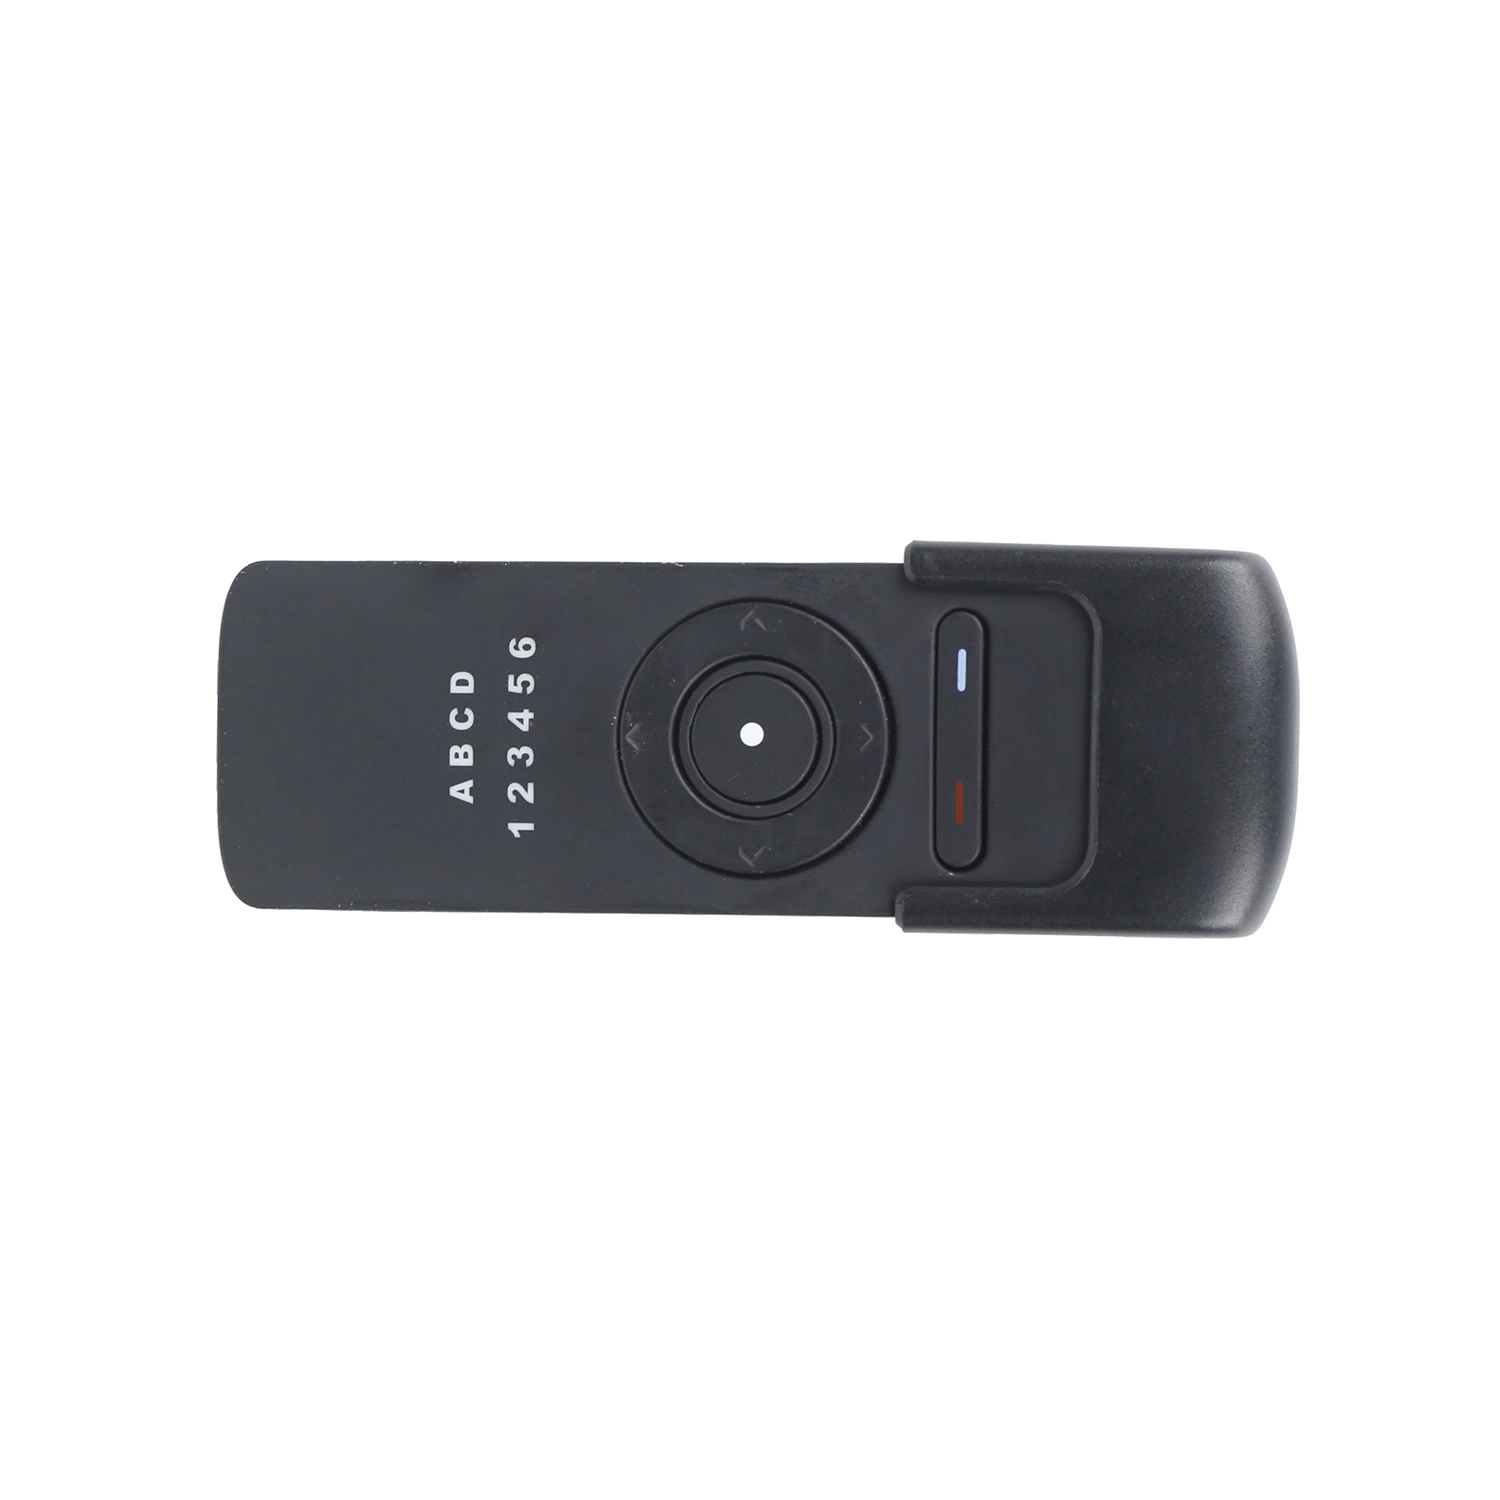 Hiland 2023 Remote Control T7710 with 433.92MHz Frequency for Automatic Doors